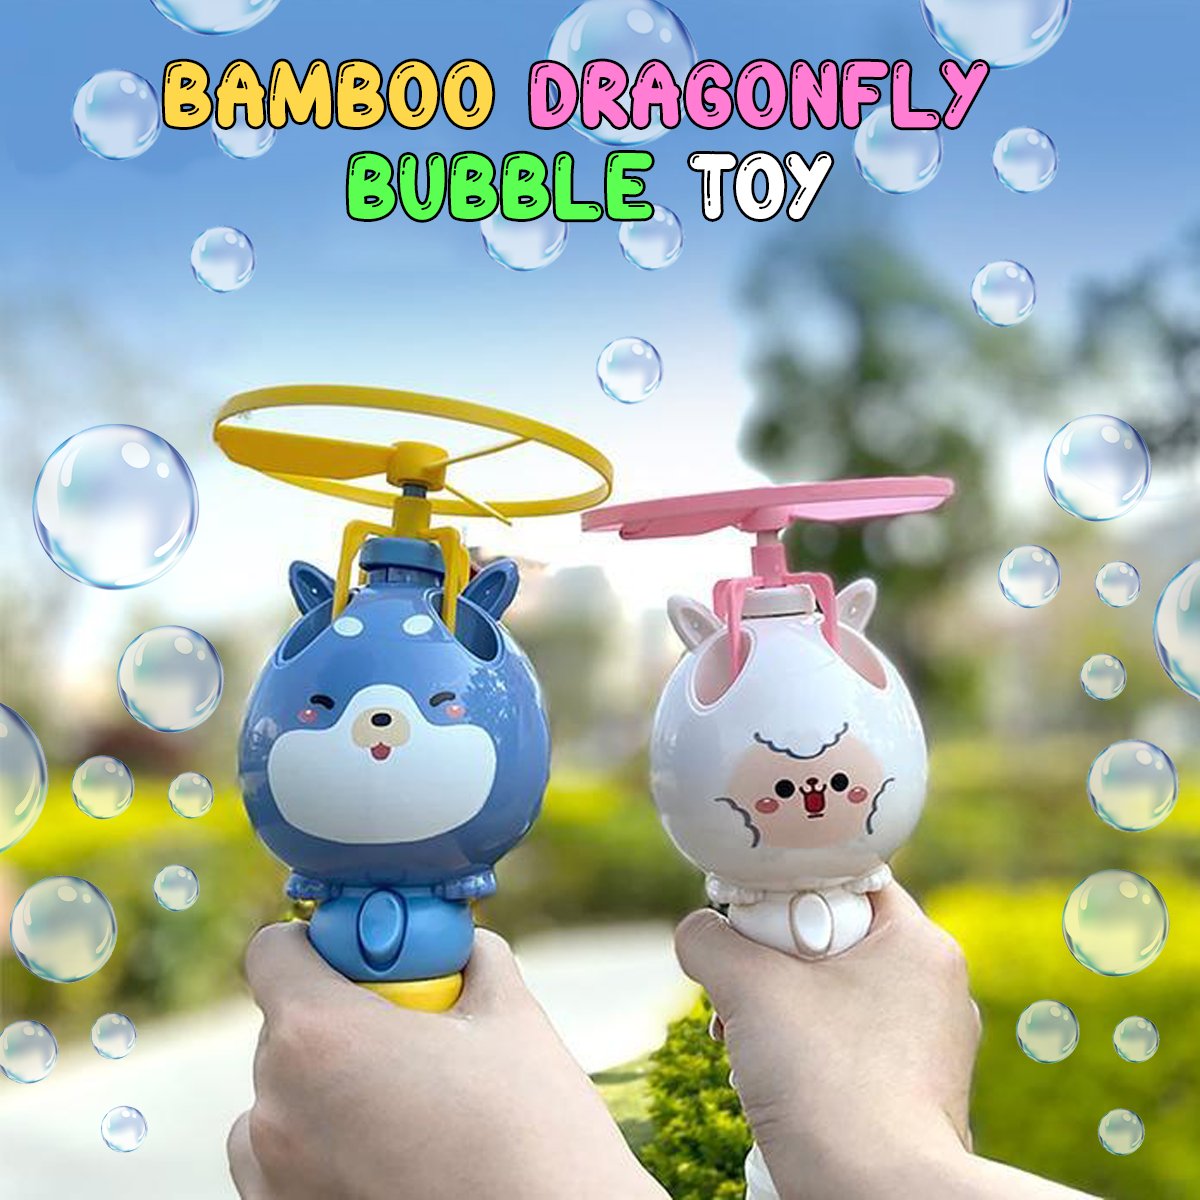 🎁Early Christmas Hot Sale 48% OFF - Bamboo Dragonfly Bubble Toy(BUY 3 FREE SHIPPING)